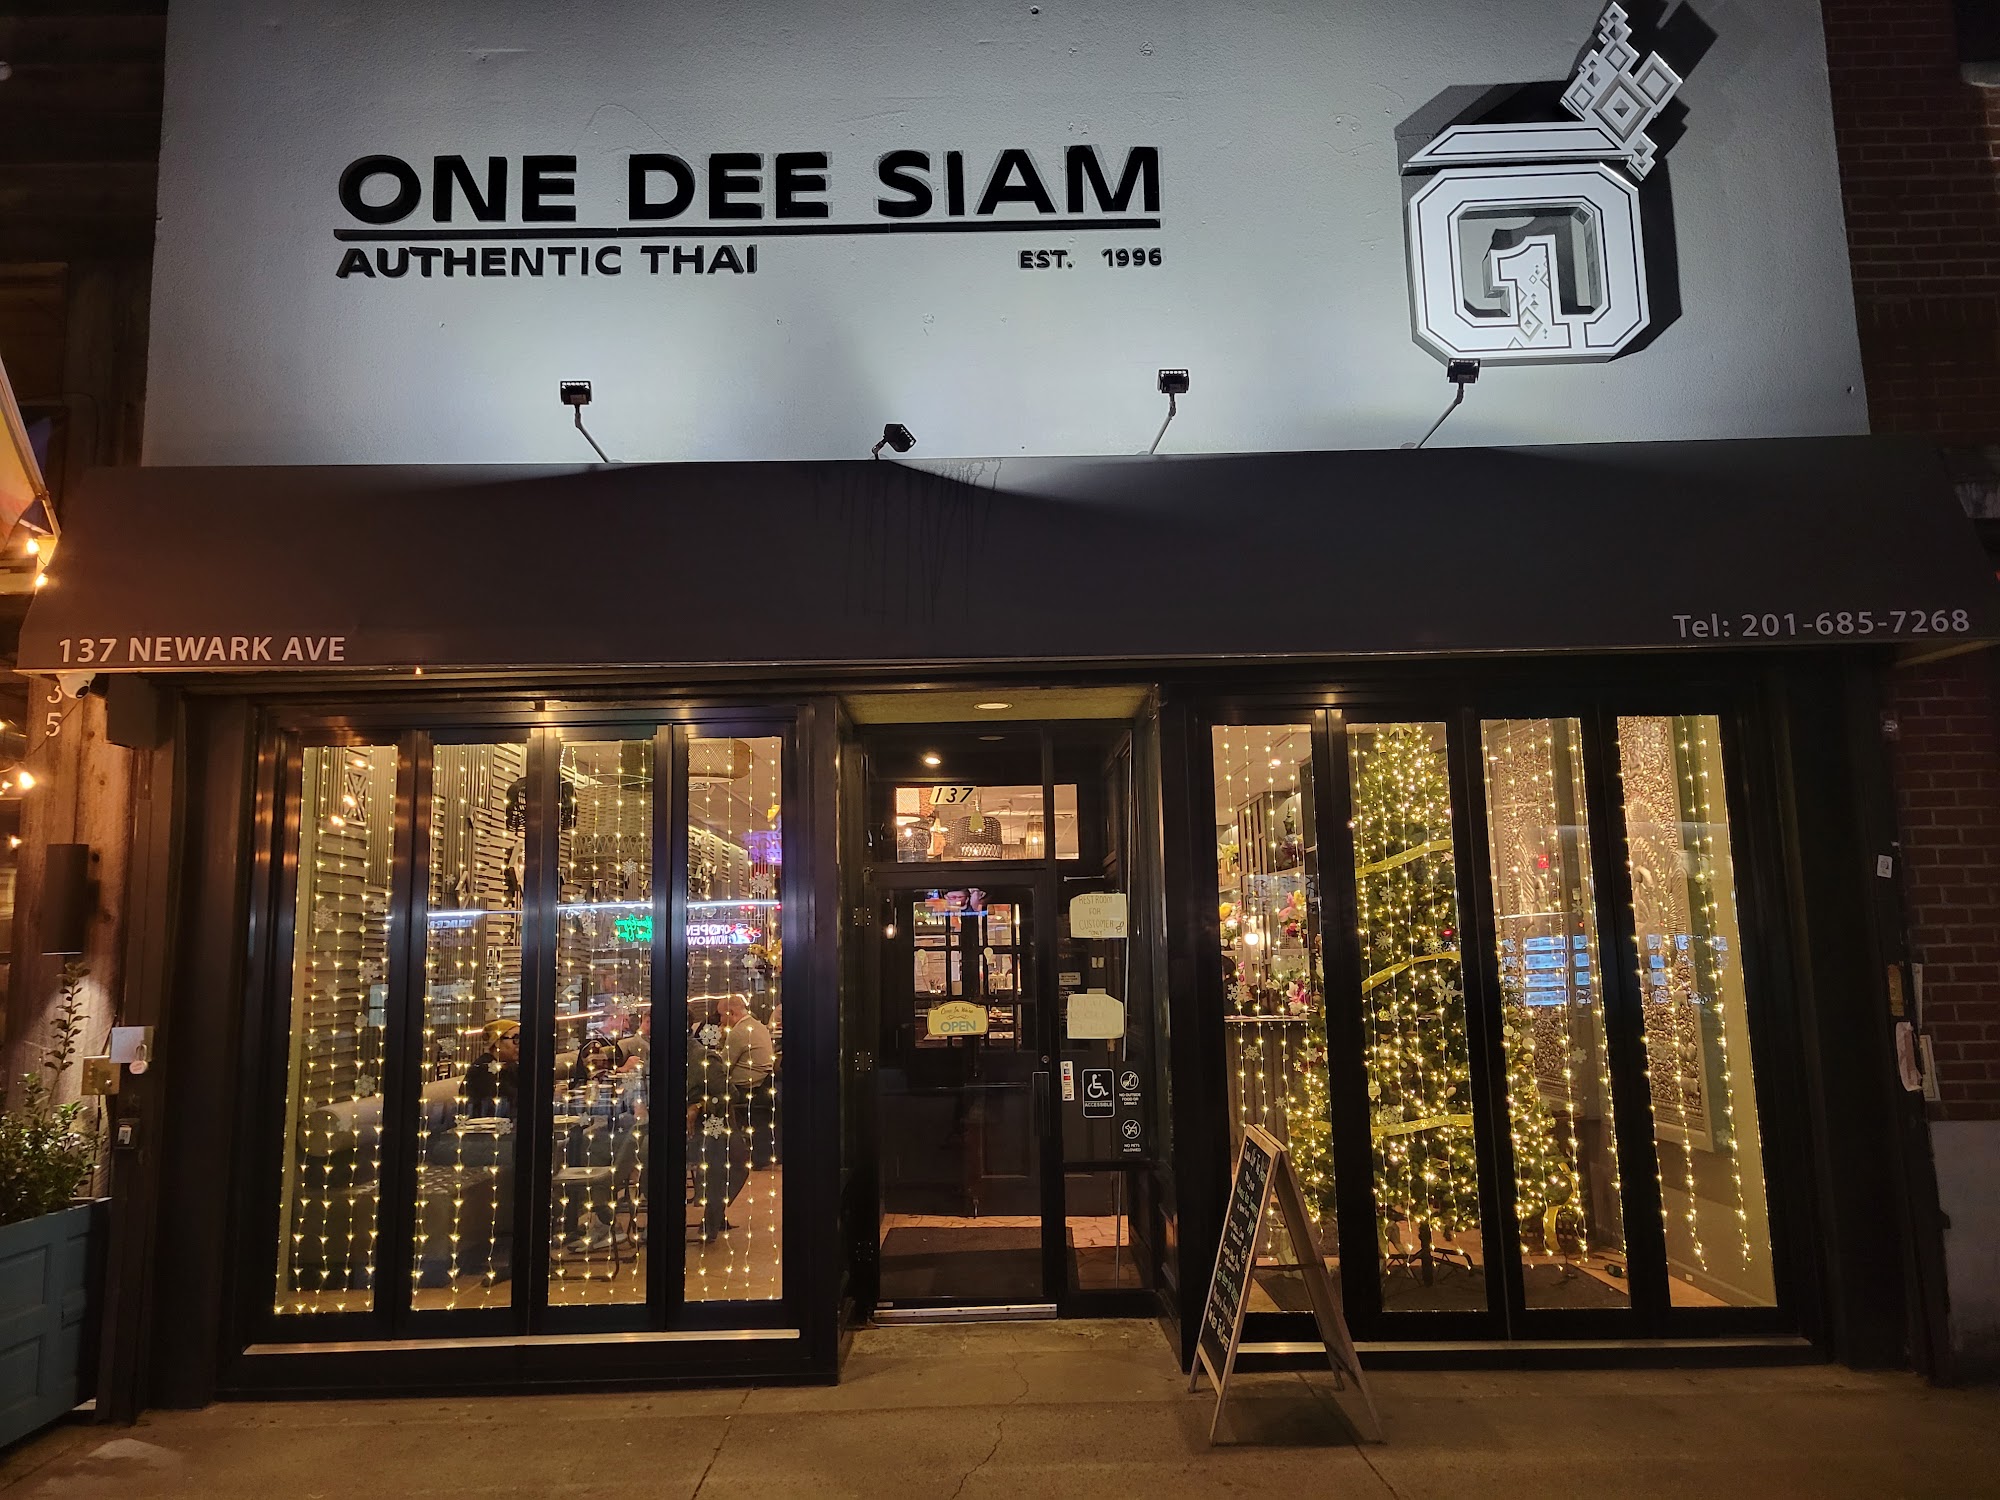 One Dee Siam